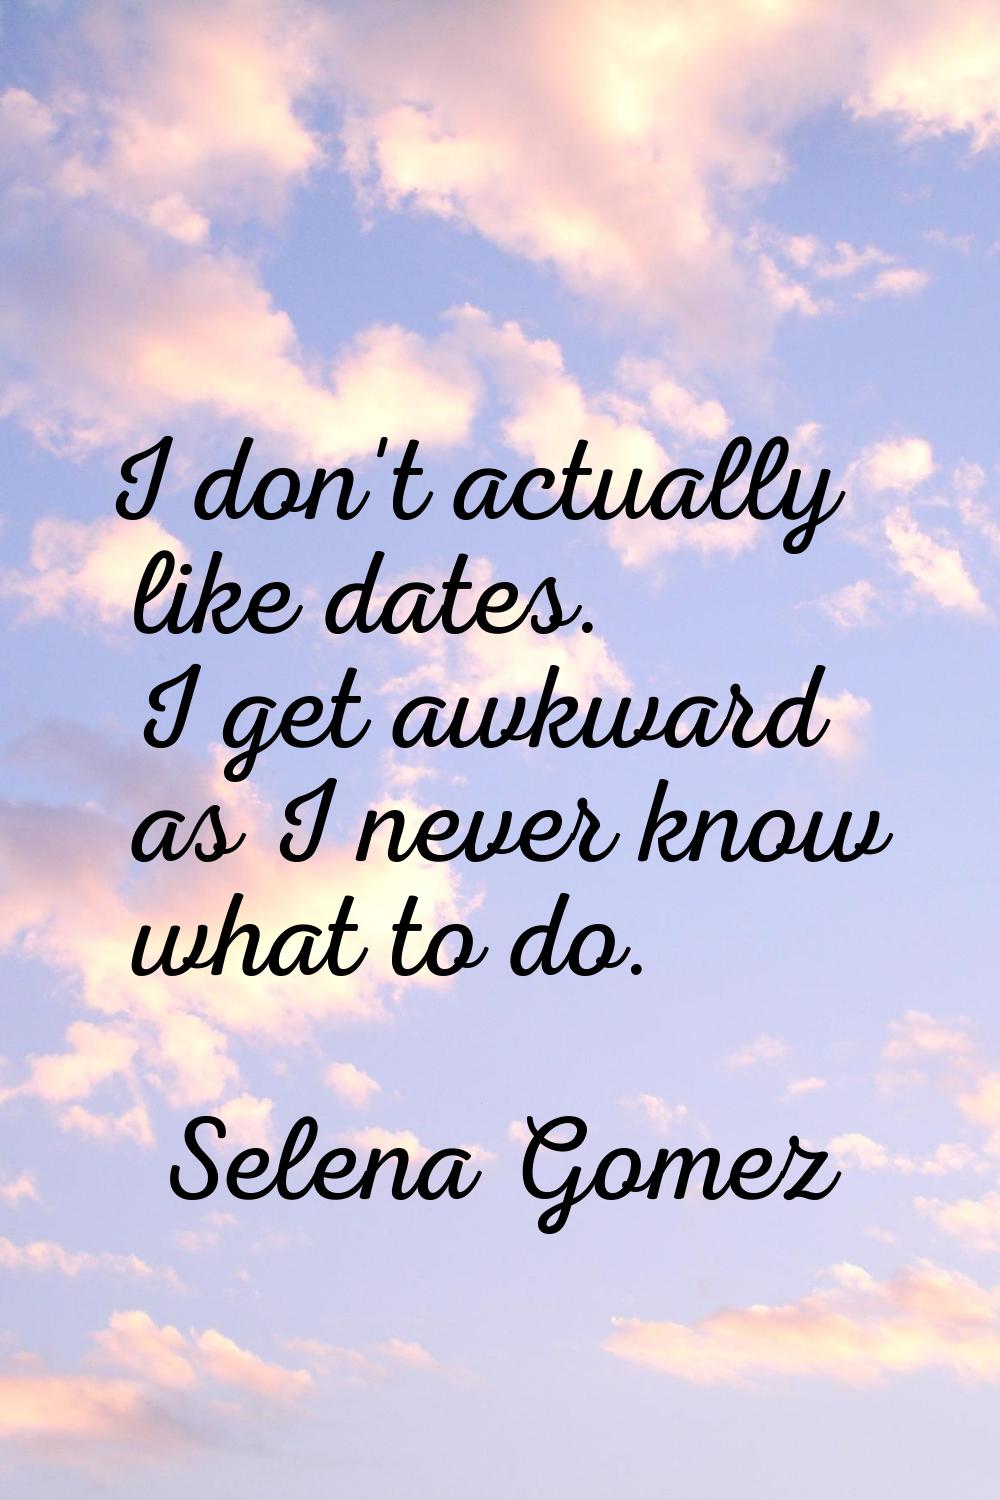 I don't actually like dates. I get awkward as I never know what to do.